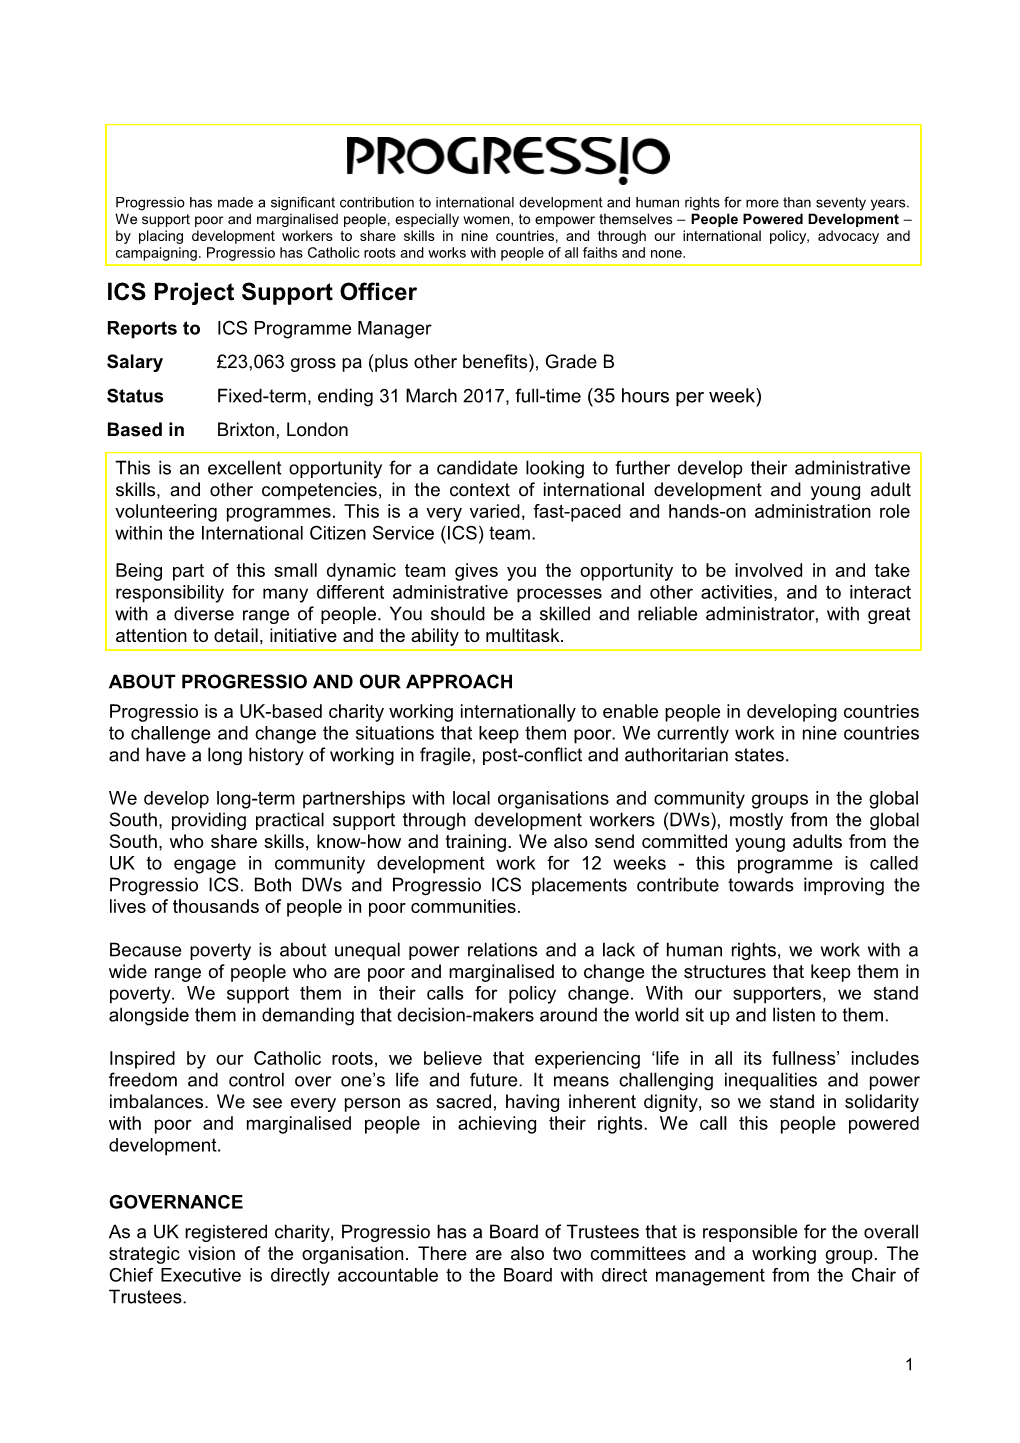 ICS Project Support Officer